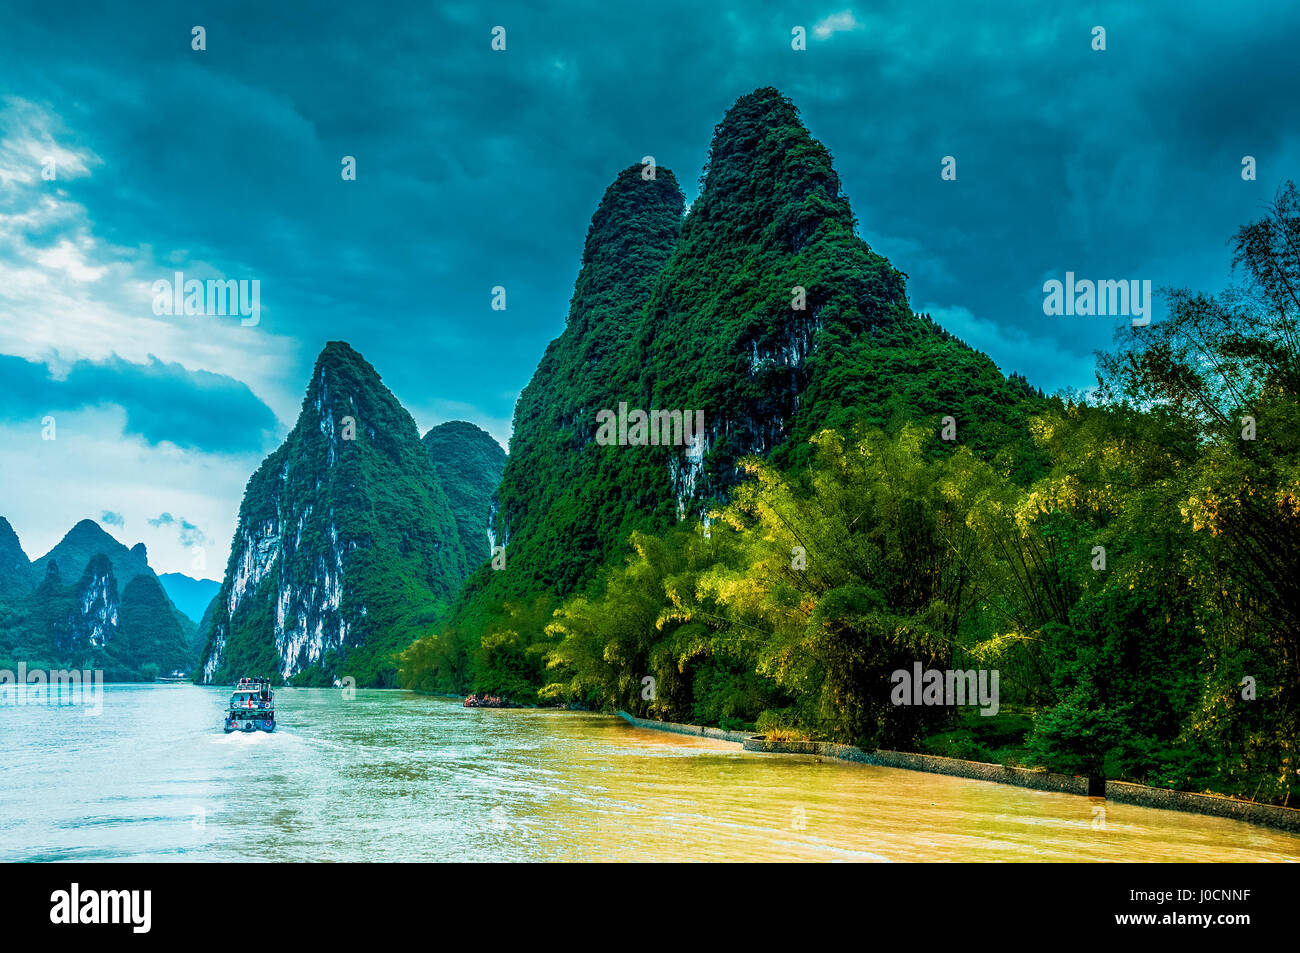 Karst mountains and Lijiang River scenery in the mist Stock Photo